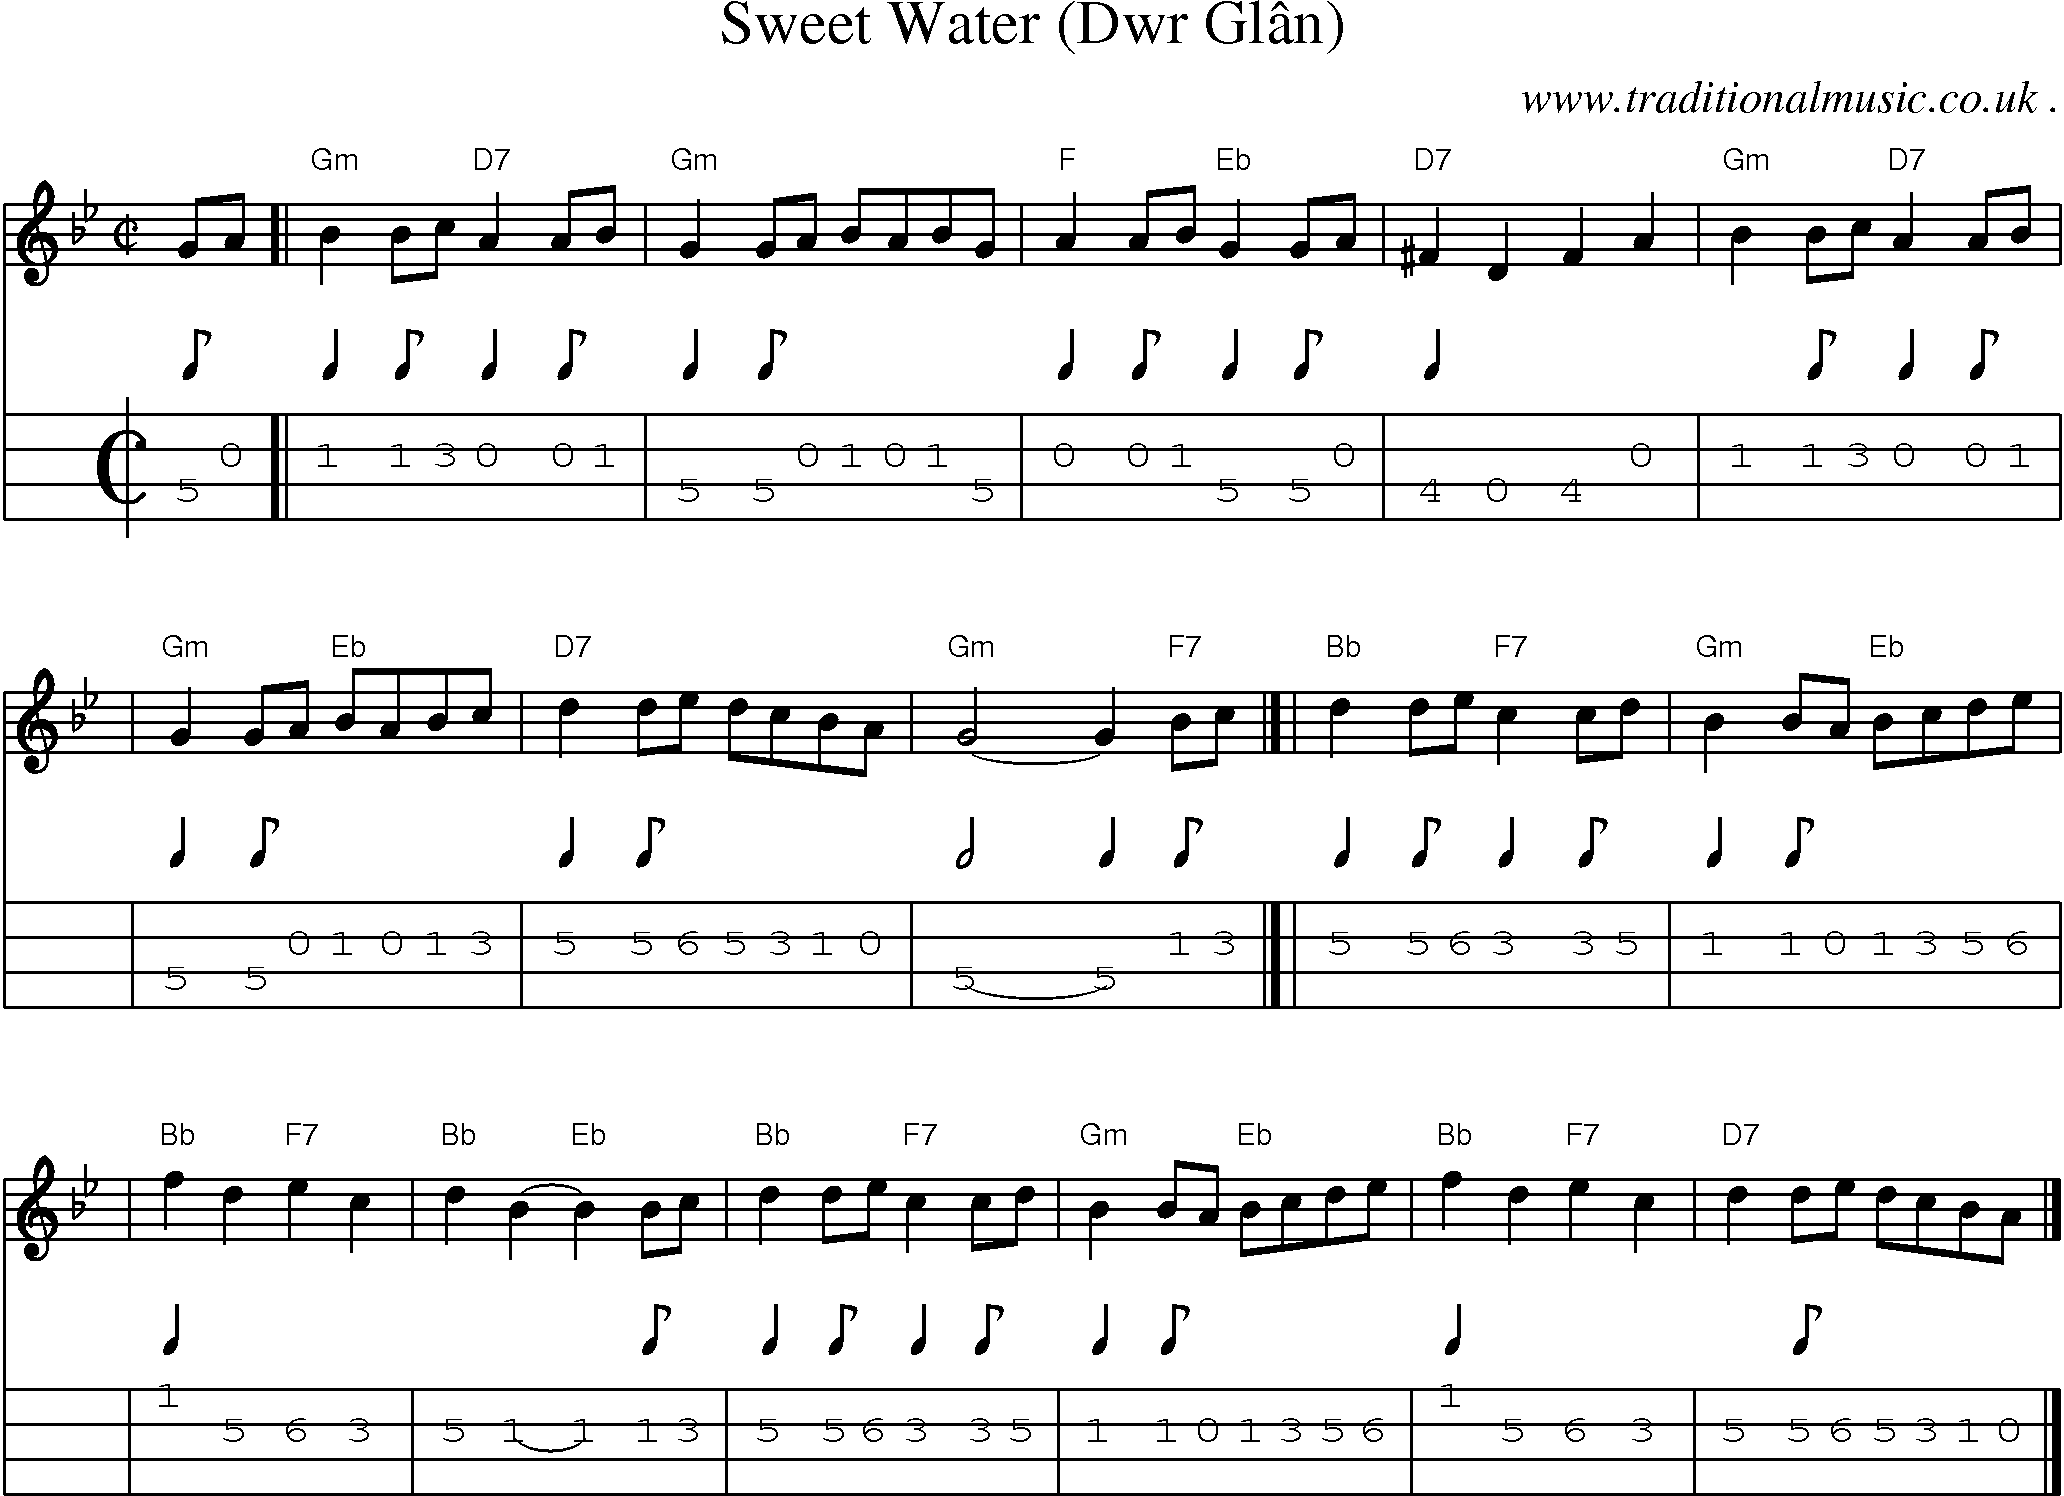 Sheet-music  score, Chords and Mandolin Tabs for Sweet Water Dwr Glan